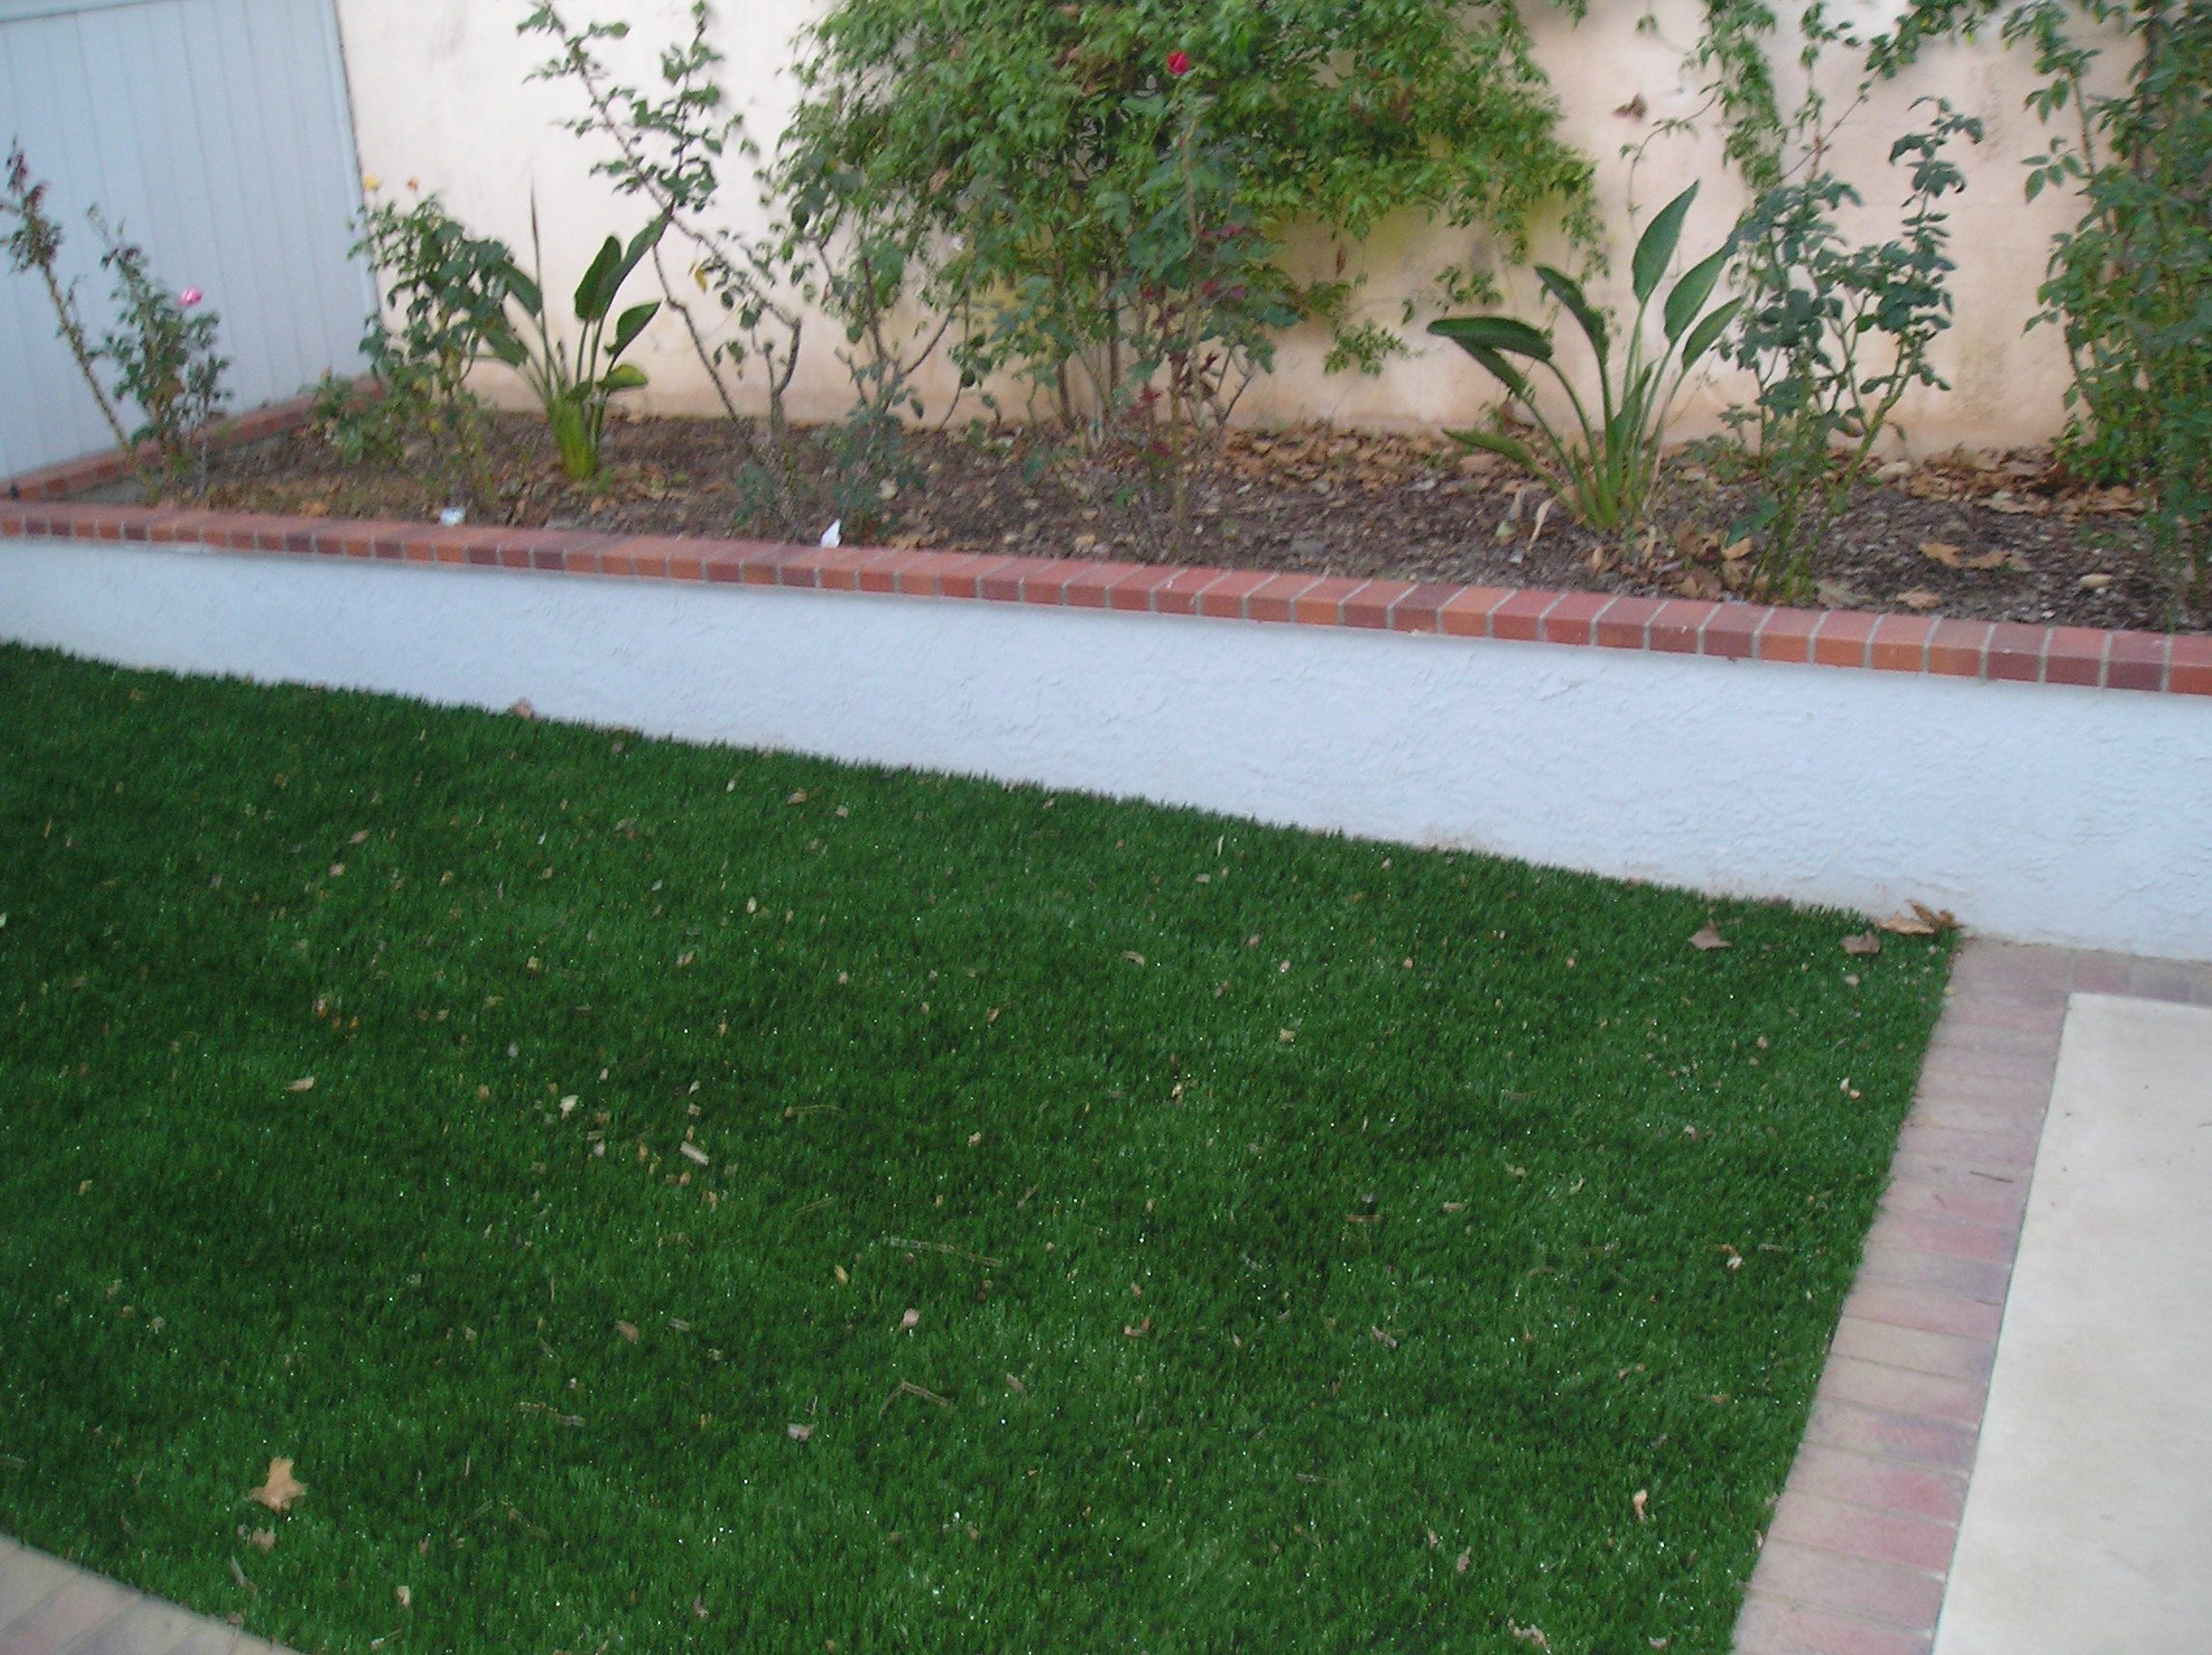 S Blade 50 artificial lawn,synthetic lawn,fake lawn,turf lawn,fake grass lawn,fake green grass,green grass carpet